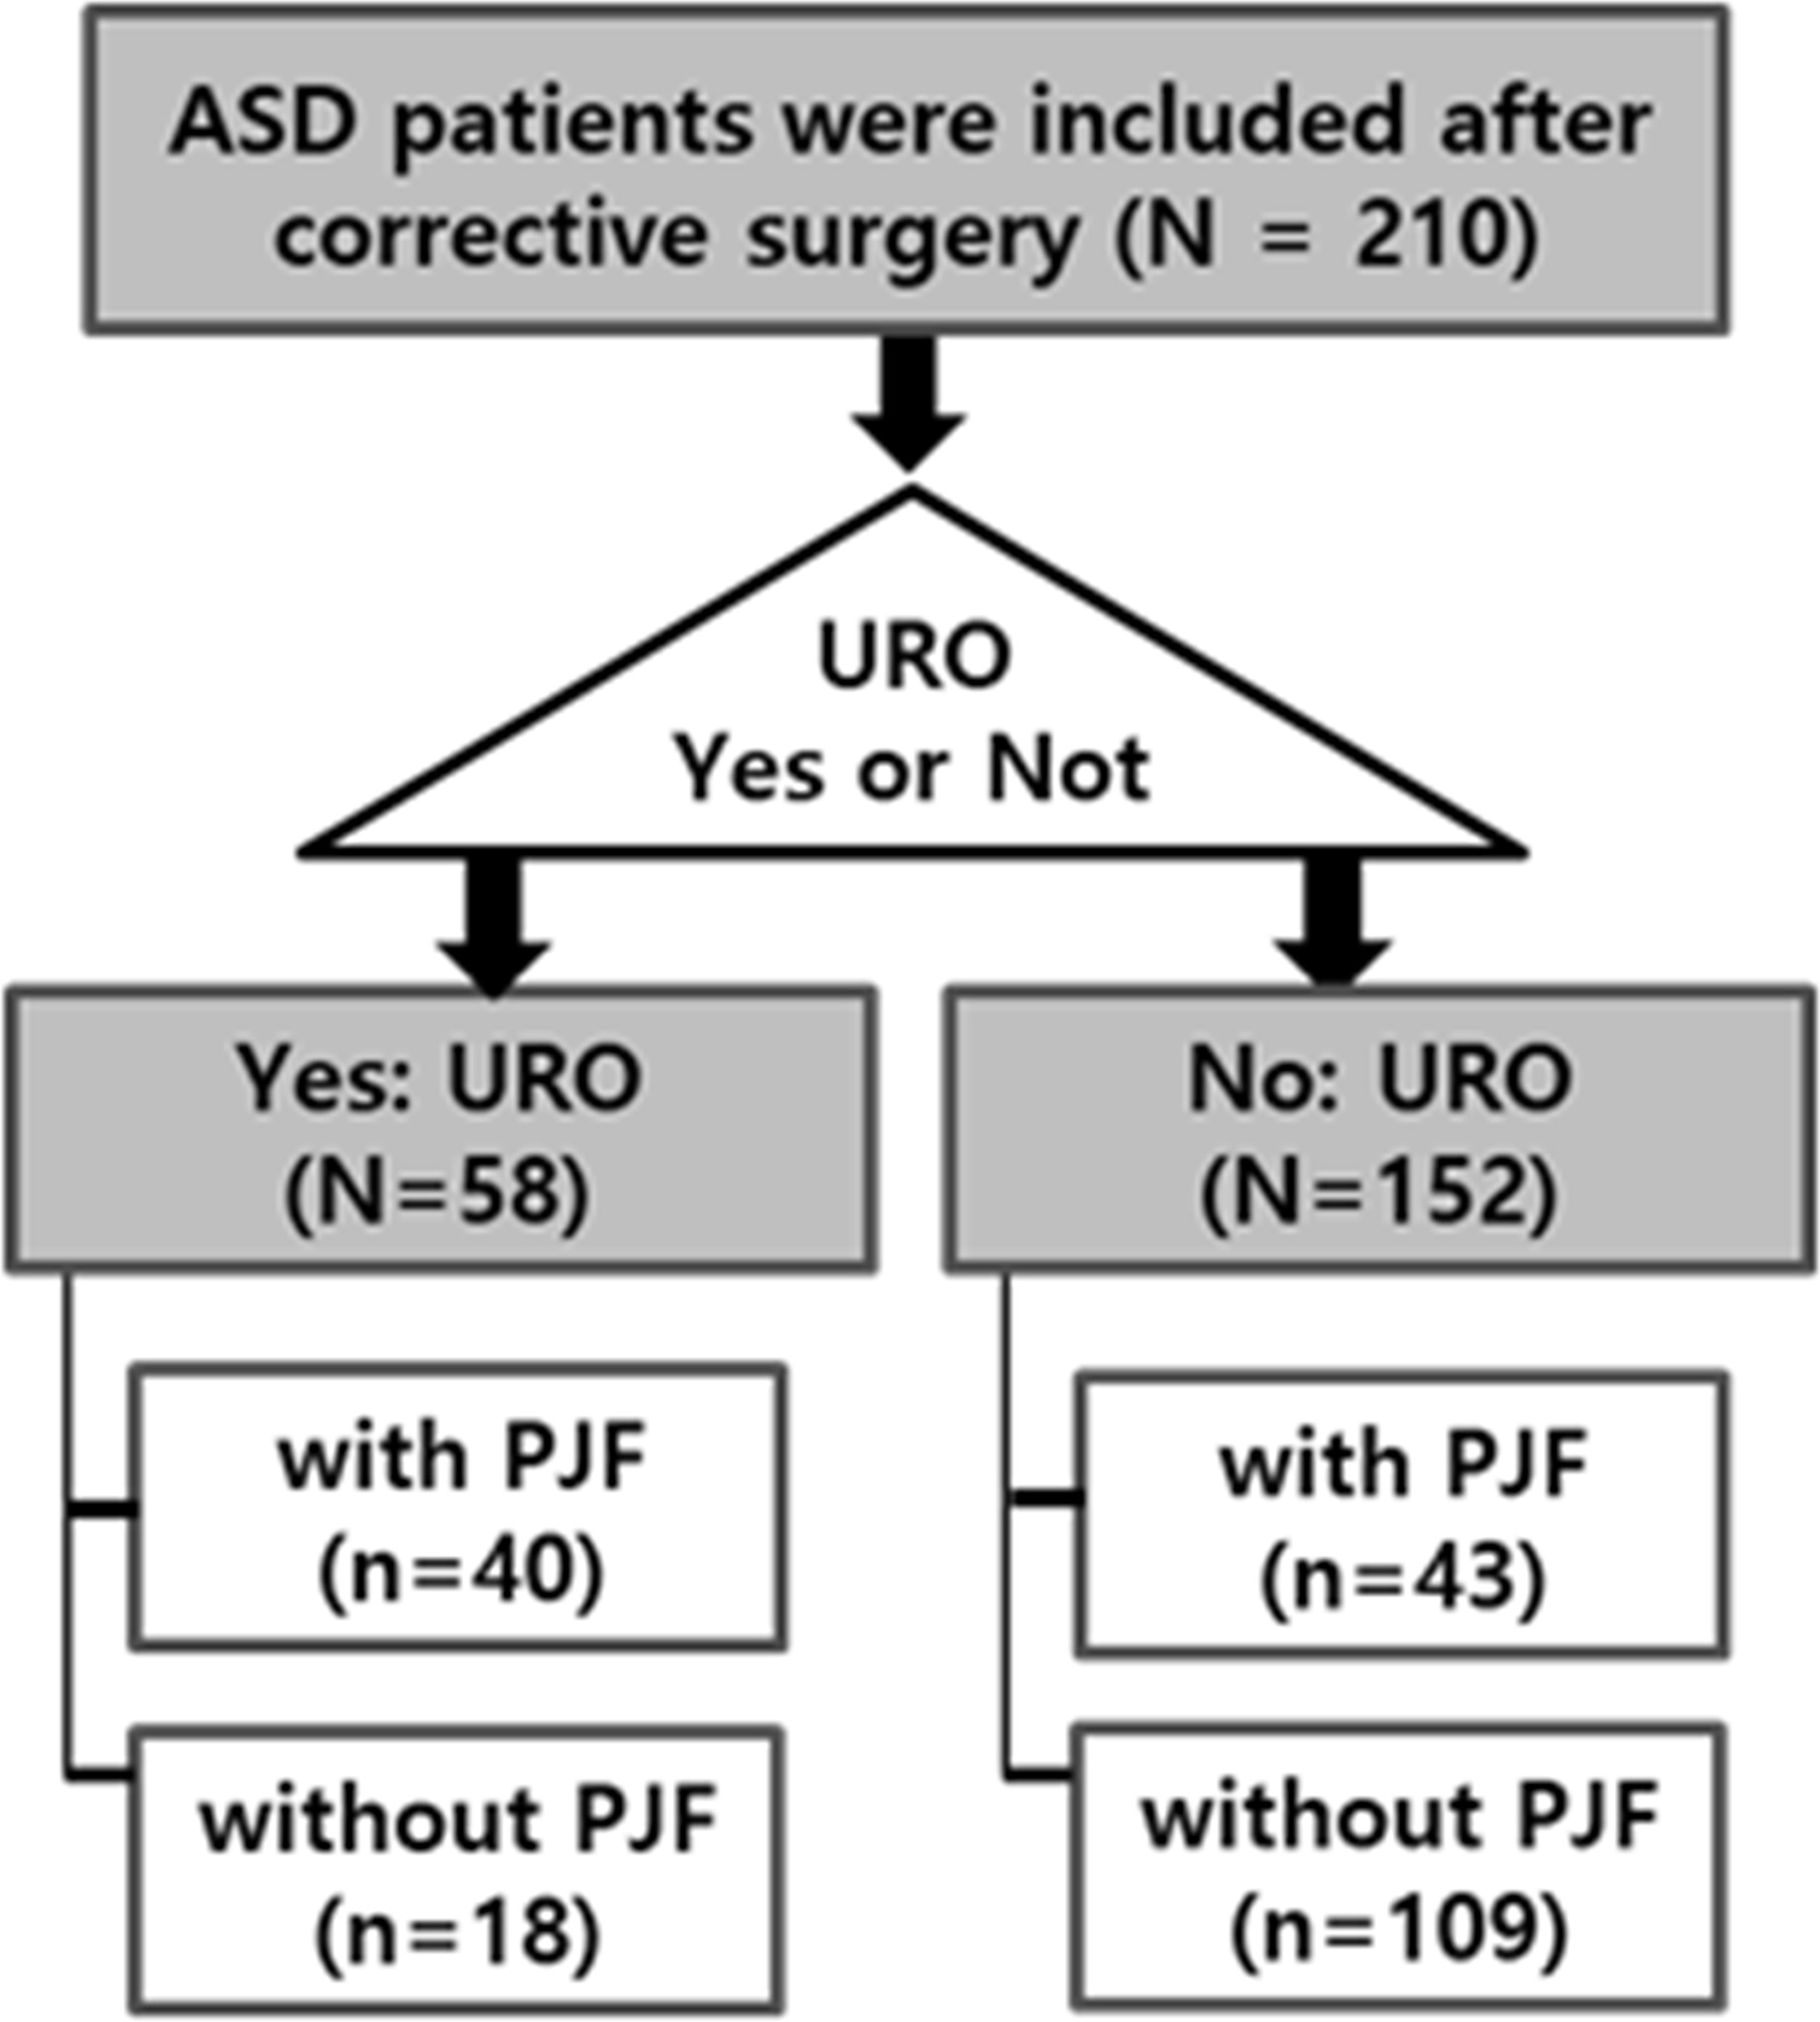 Fig. 1 
          Patient flow chart. Classification was based on whether proximal junction failure (PJF) or unplanned reoperation (URO) occurred. ASD, adult spinal deformity.
        